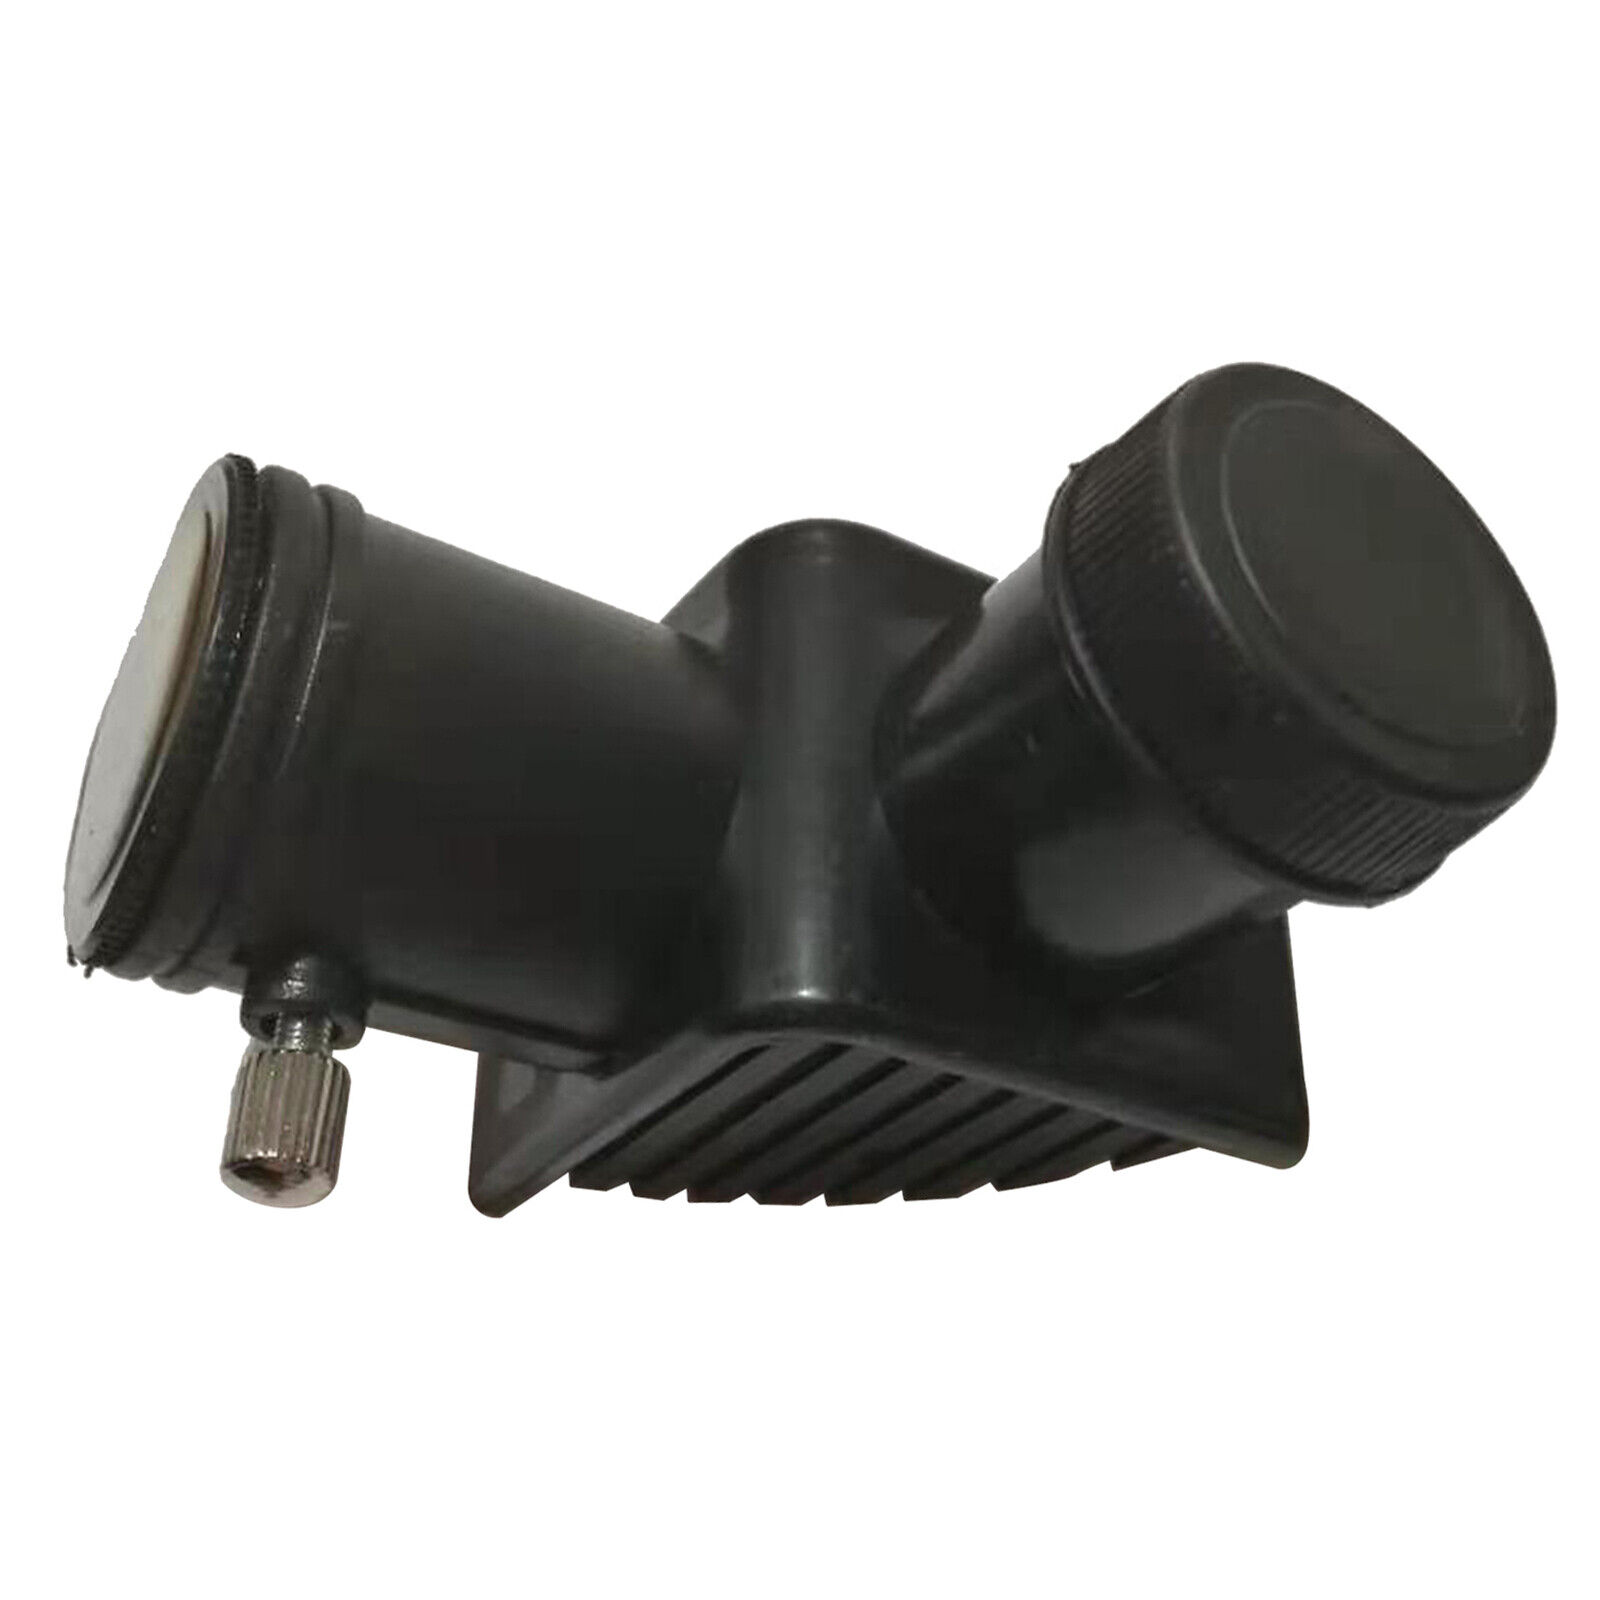 0.965 Inch 90 Degree Astronomical Telescope Diagonal Mirror/Erecting Prism with